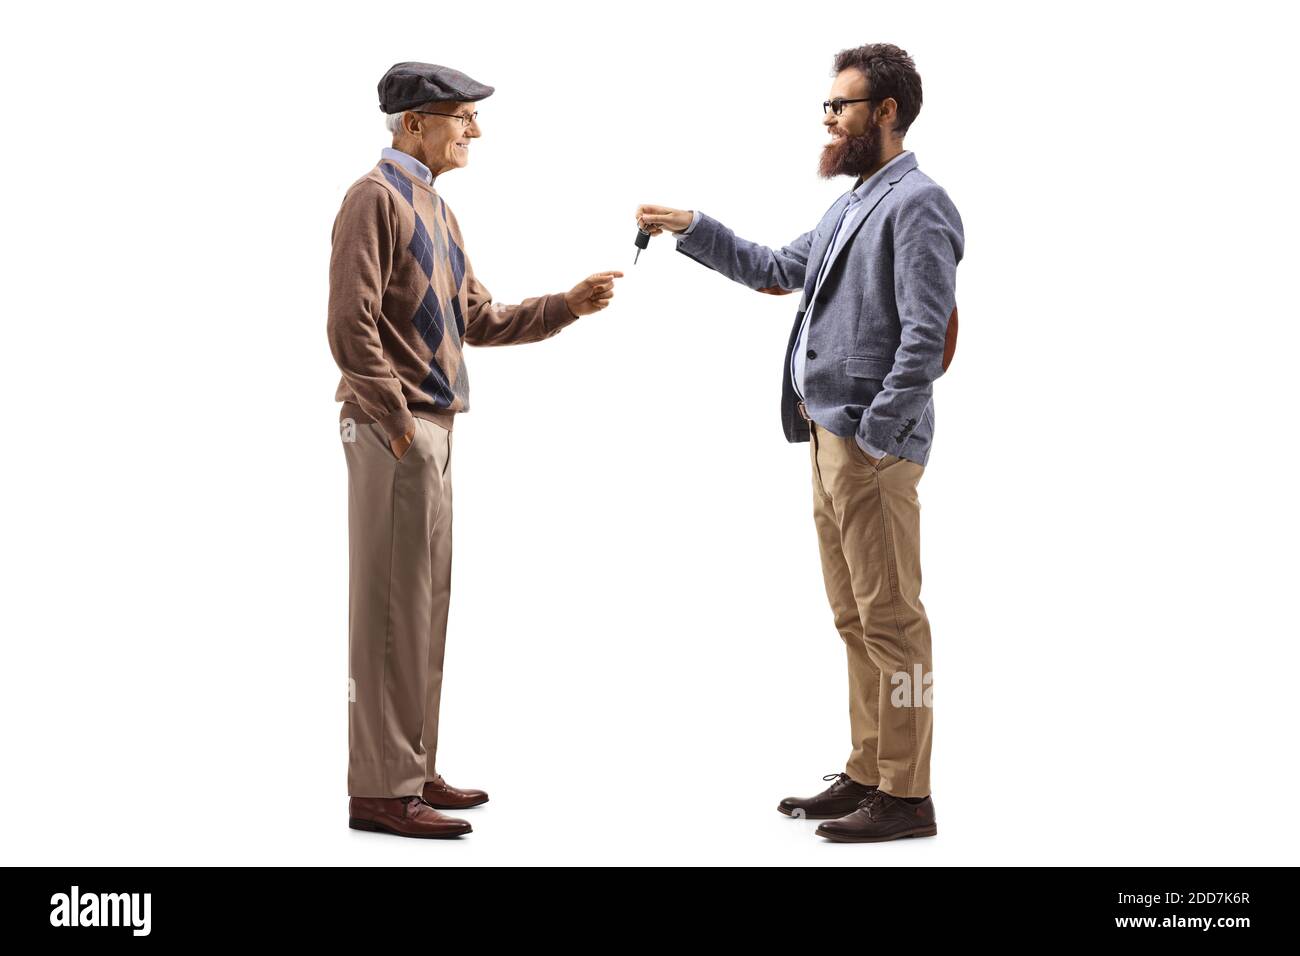 Bearded man giving car keys to an elderly man isolated on white background Stock Photo